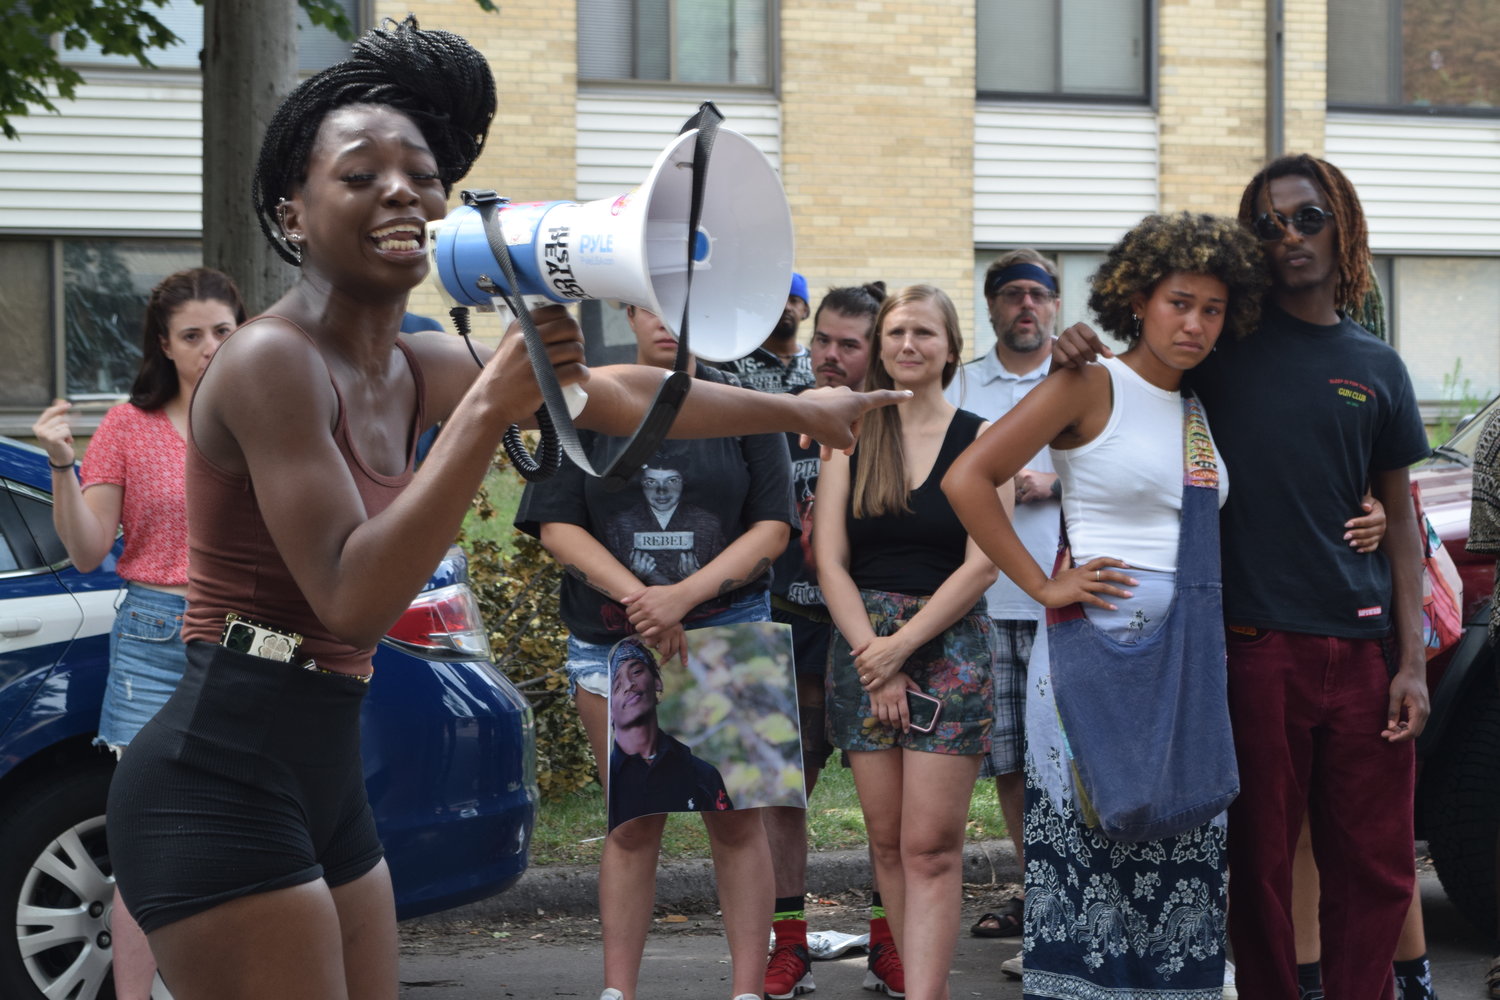 Markeanna Dionne, a former classmate of Sundberg’s at Roosevelt High School, led a chant to say his name, “Tekle” on July 16, 2022. (Photo by Jill Boogren)